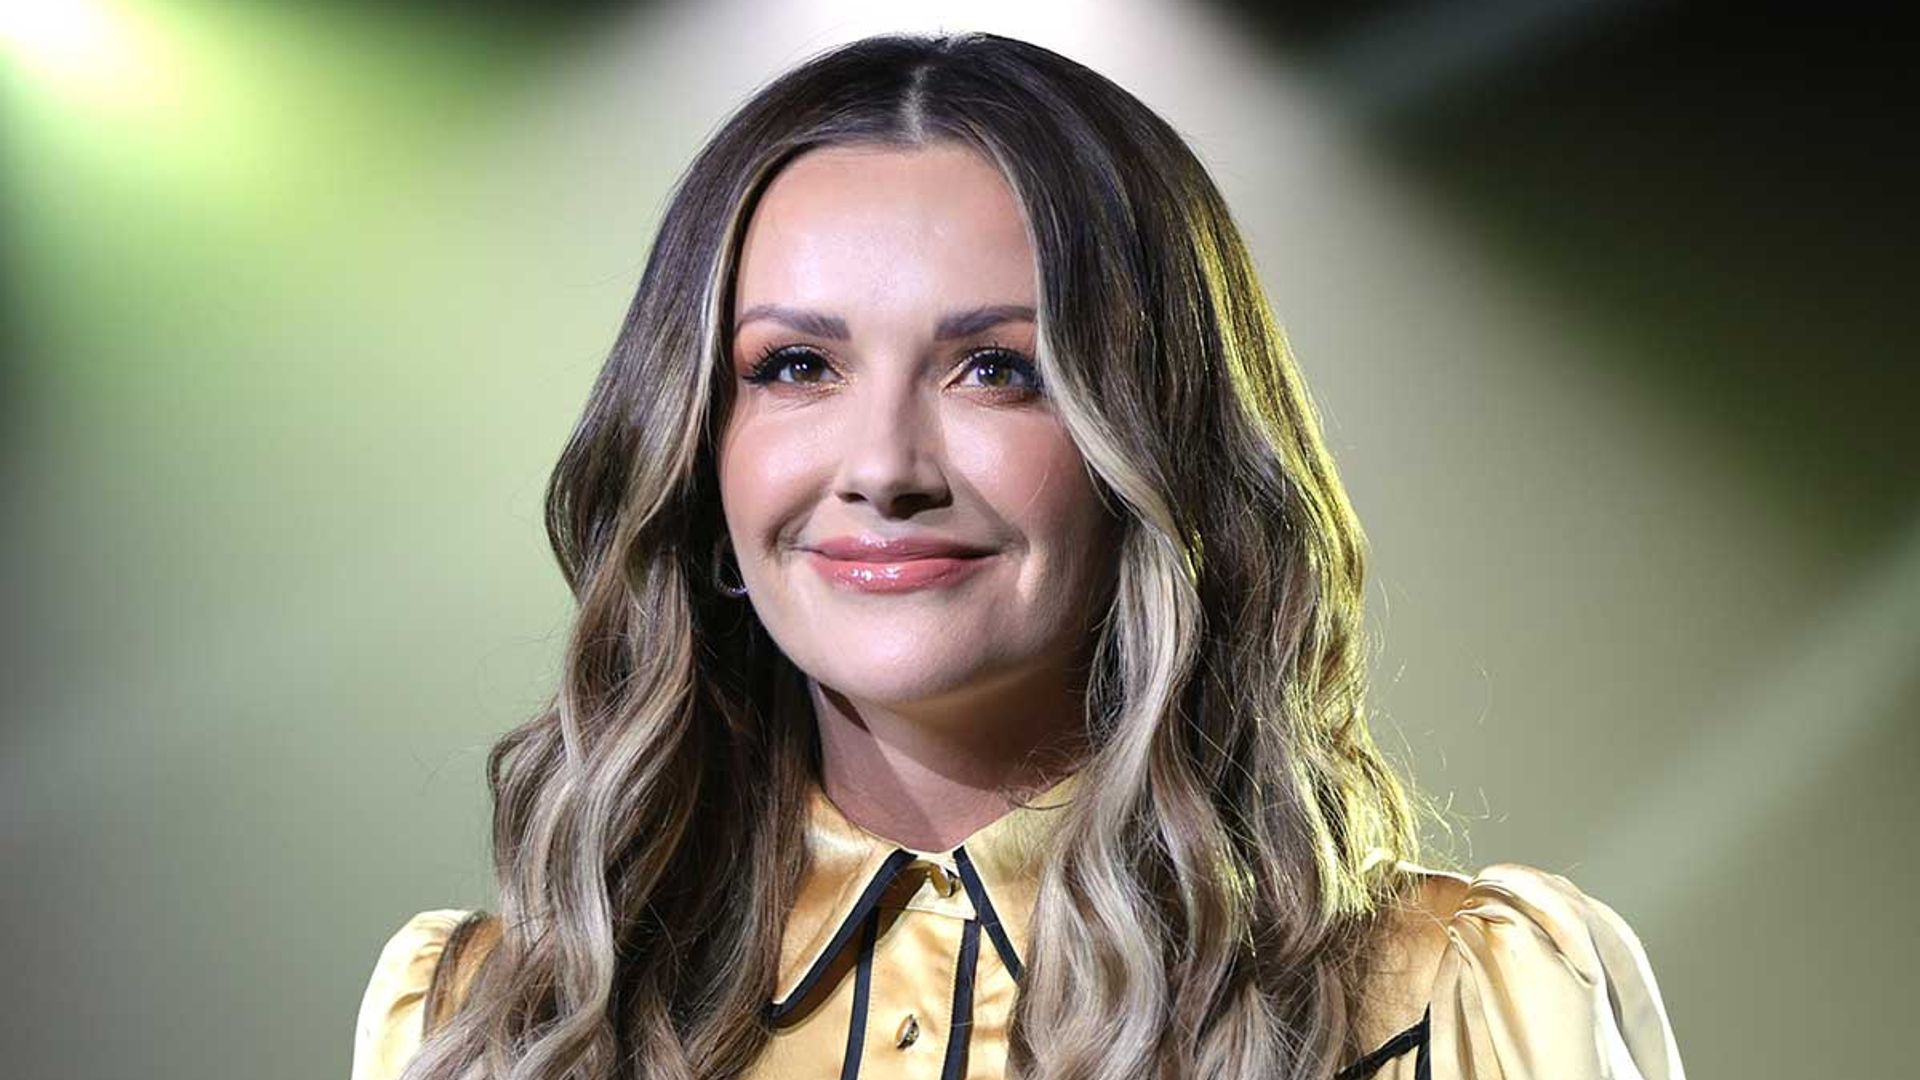 Exclusive: ACM Awards winner Carly Pearce pays heartfelt tribute to 'inspirational' Dolly Parton